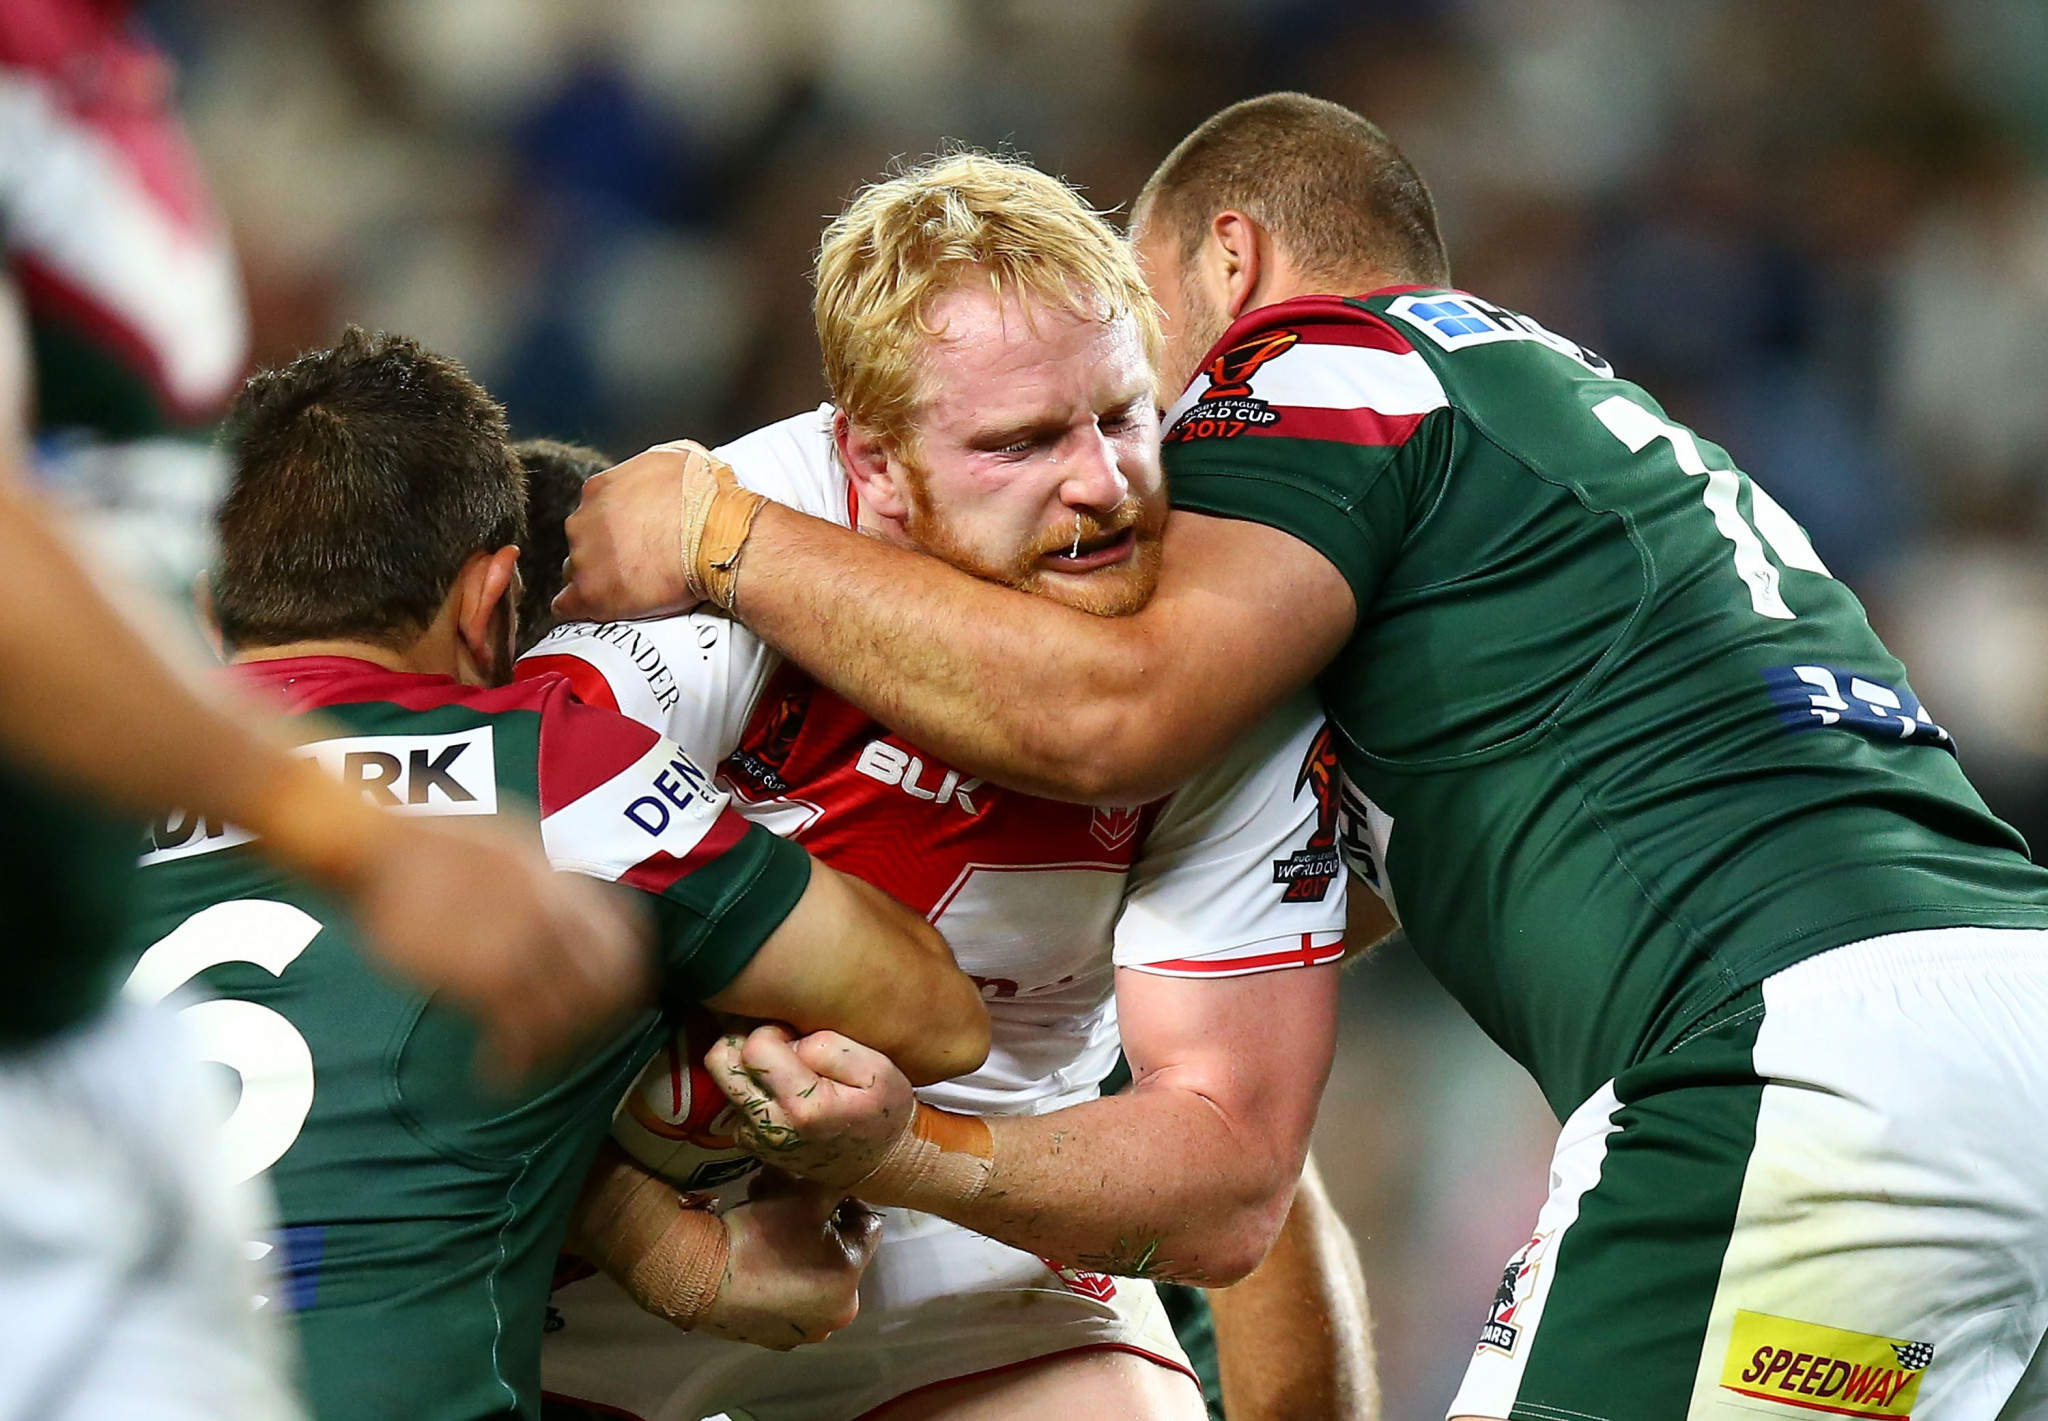 England coast to victory against Lebanon but winger is accused of biting at Rugby League World Cup